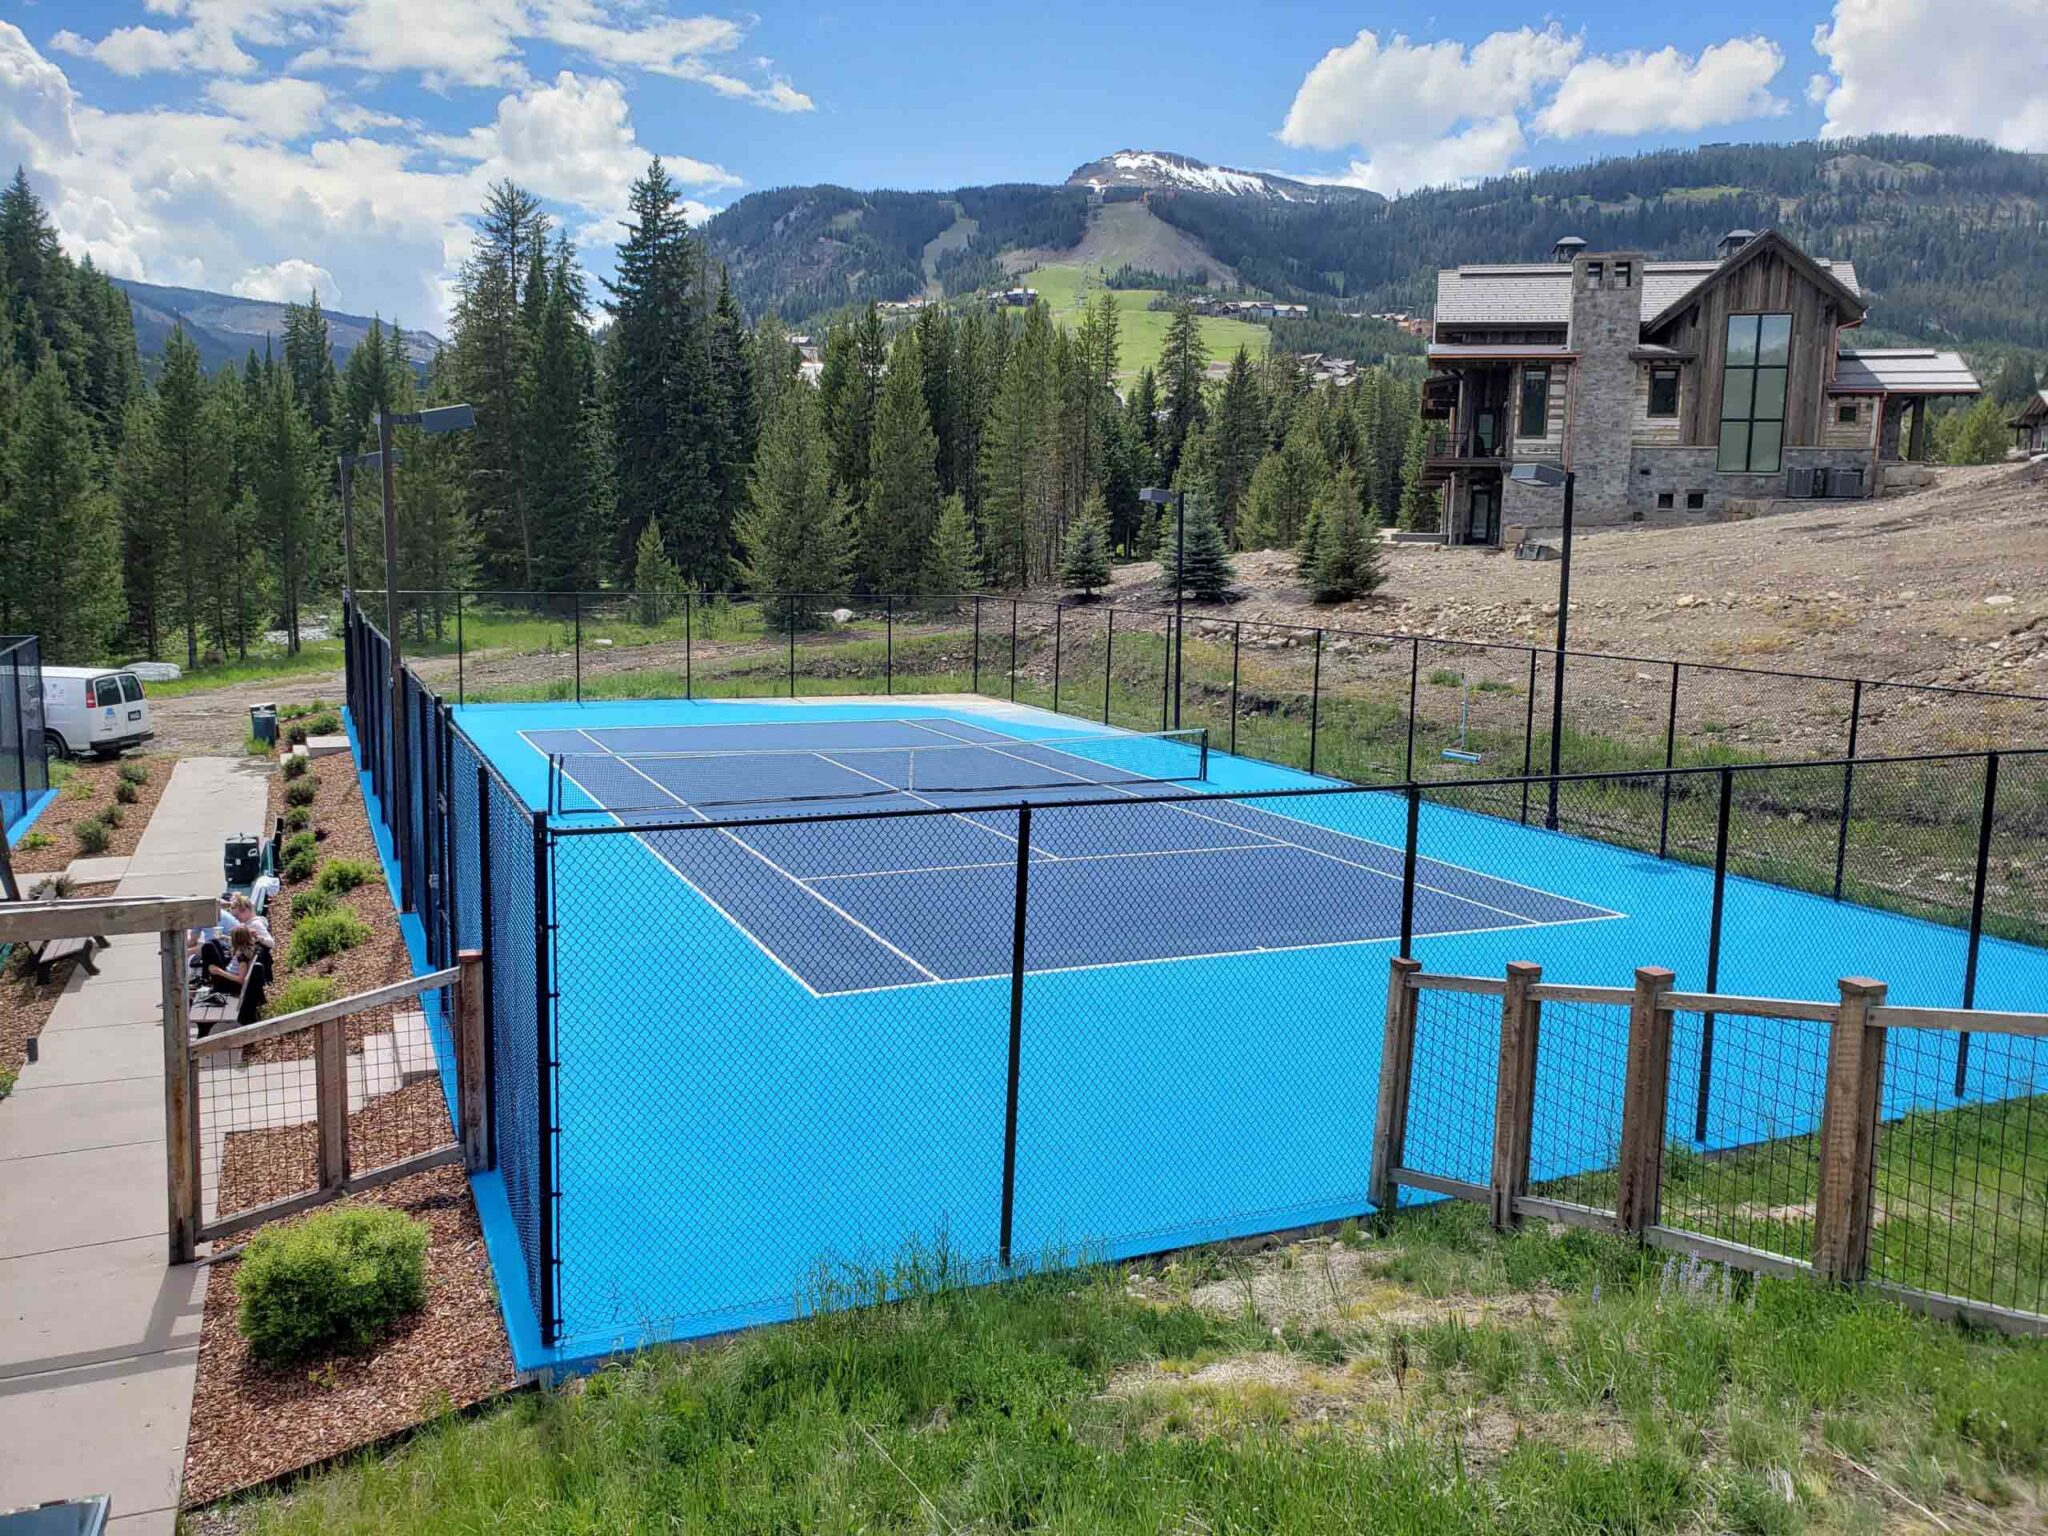 A new tennis court including a blue and white color scheme backdropped by luxury homes and mountains.